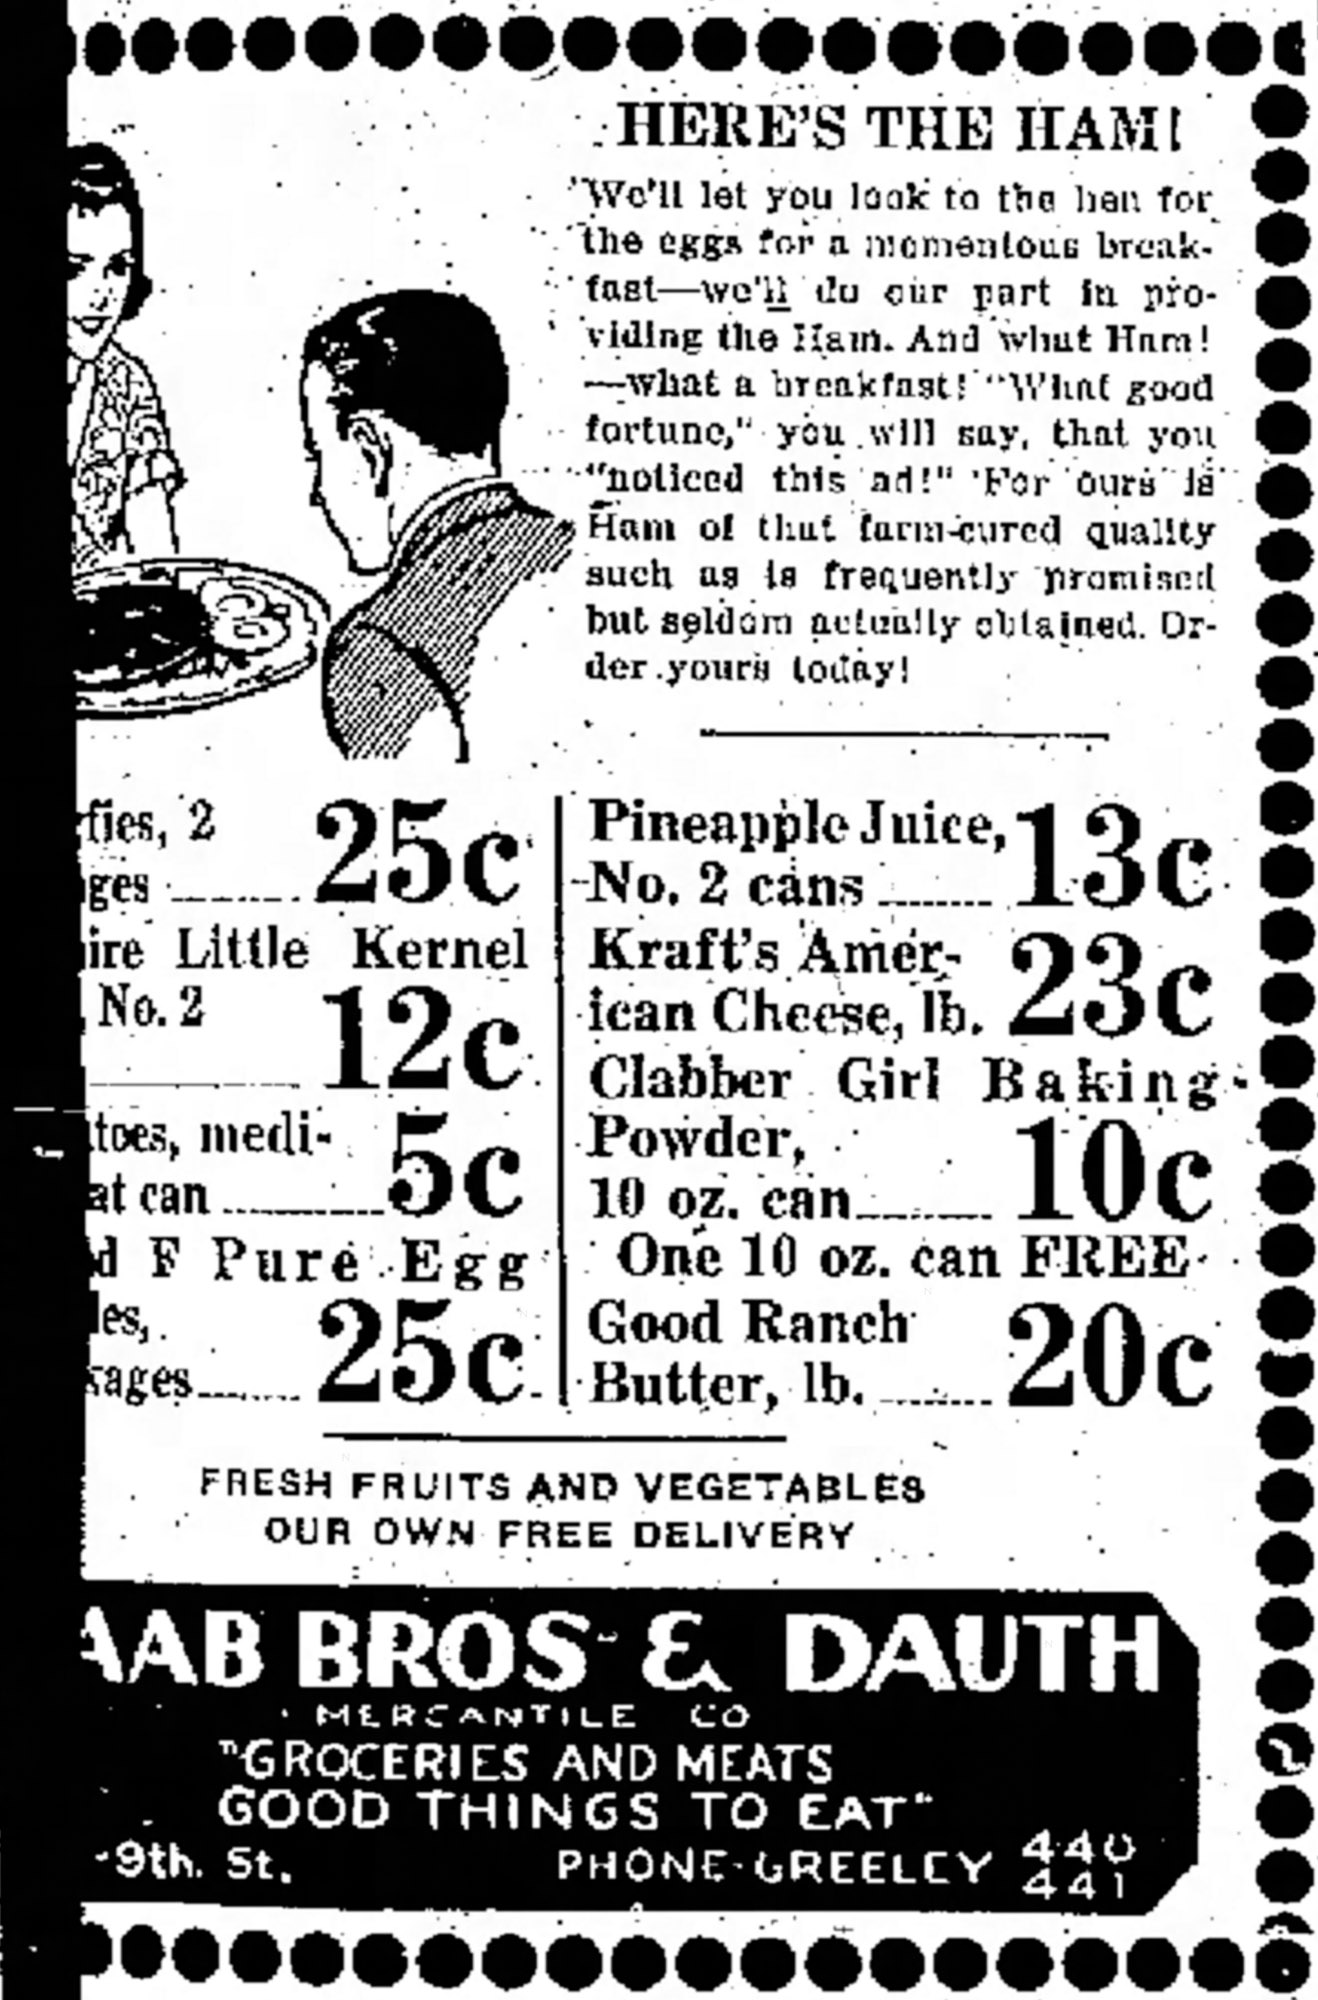 Dauth Family Archive - 1933-02-24 - Greeley Daily Tribune - Baab Bros and Dauth Advertisement